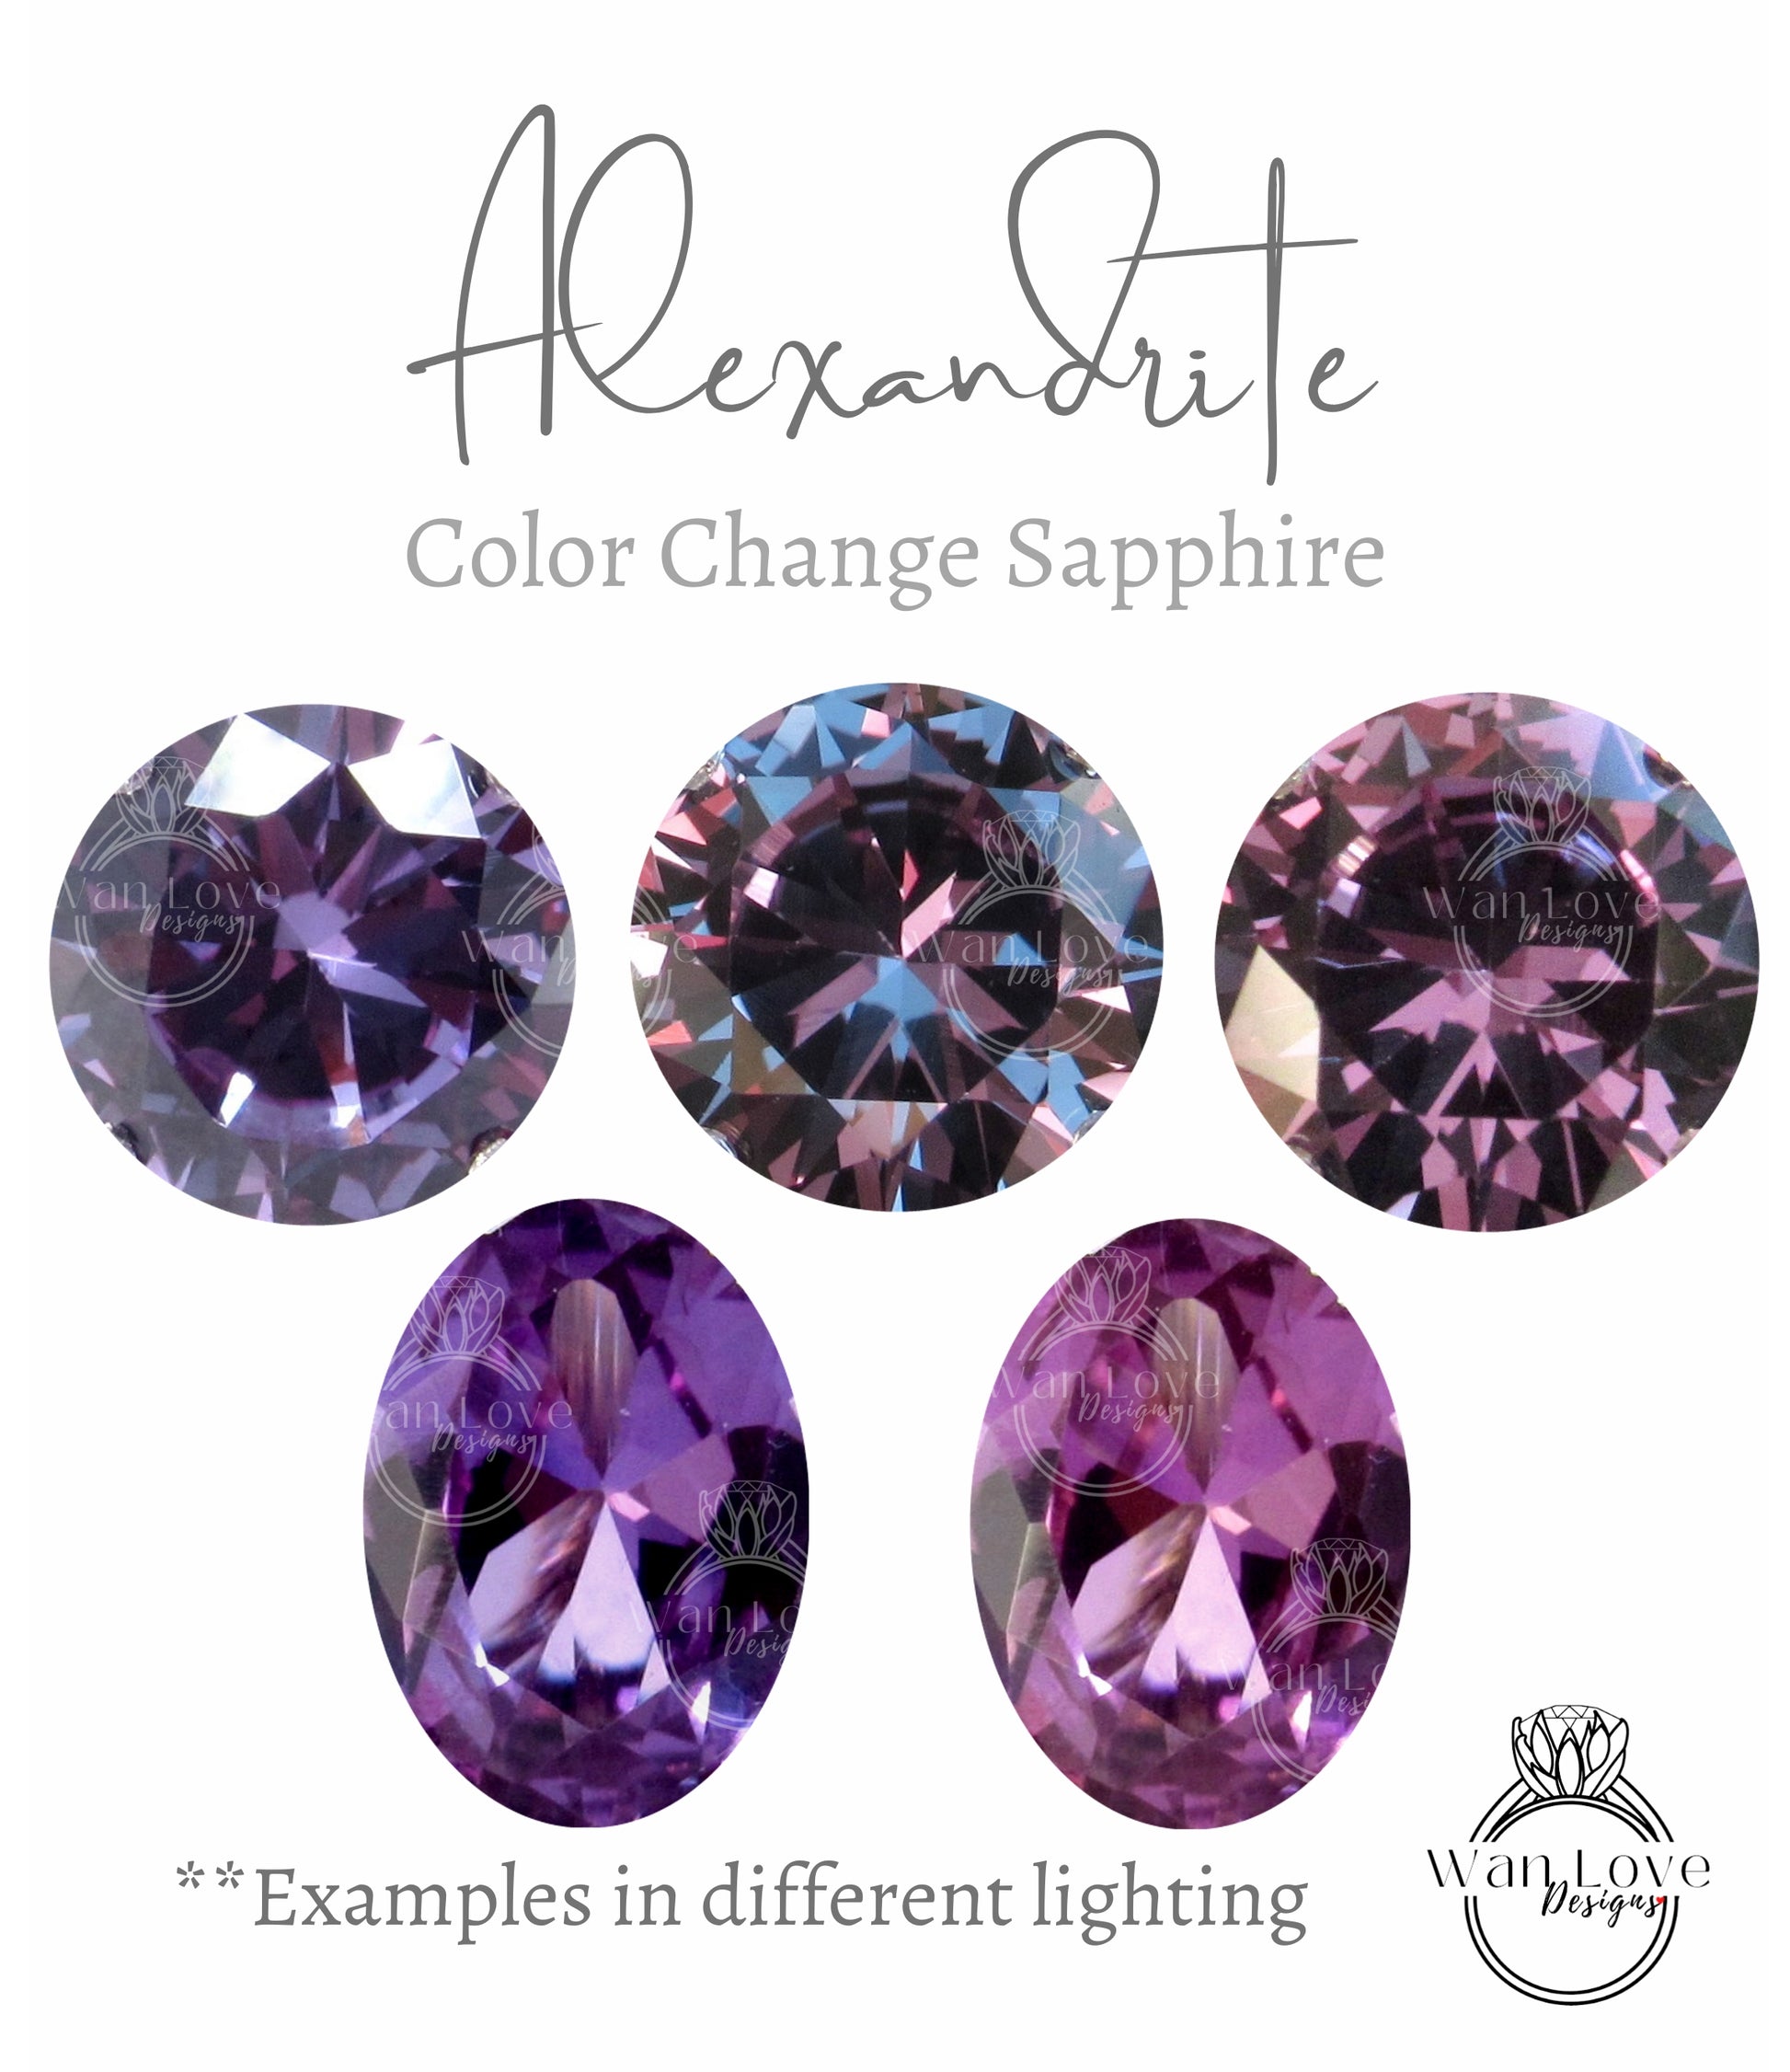 three different color change sapphires are shown